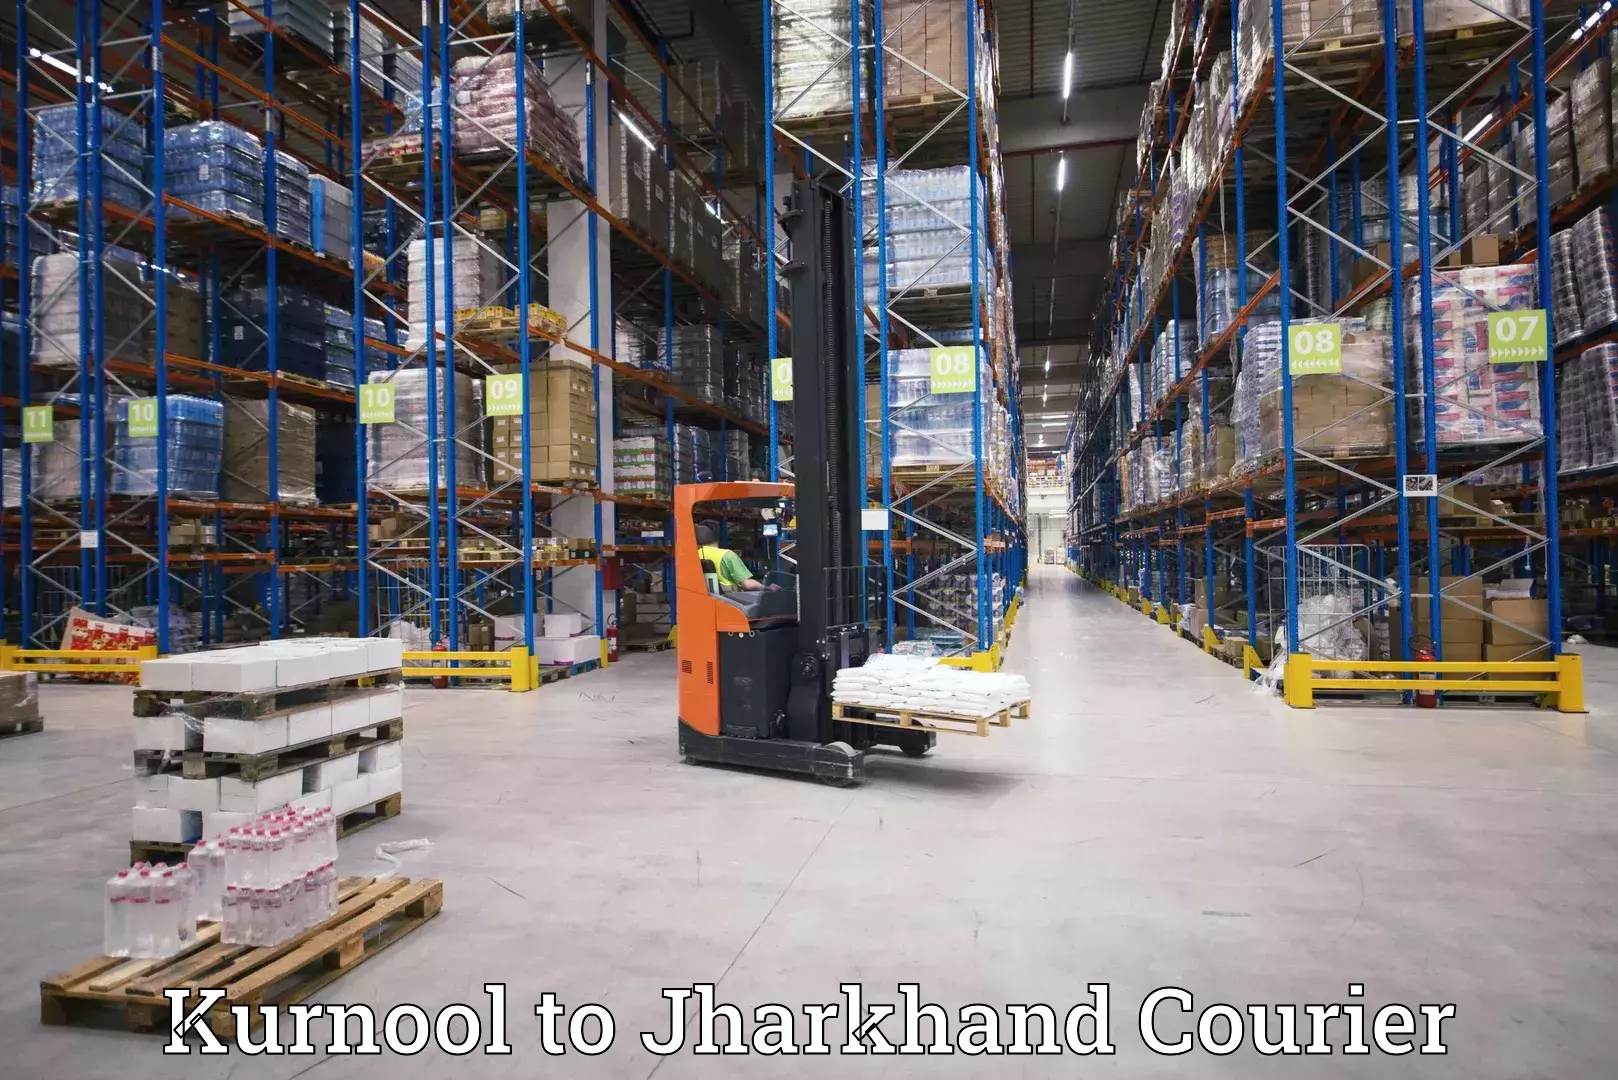 State-of-the-art courier technology Kurnool to Ramgarh